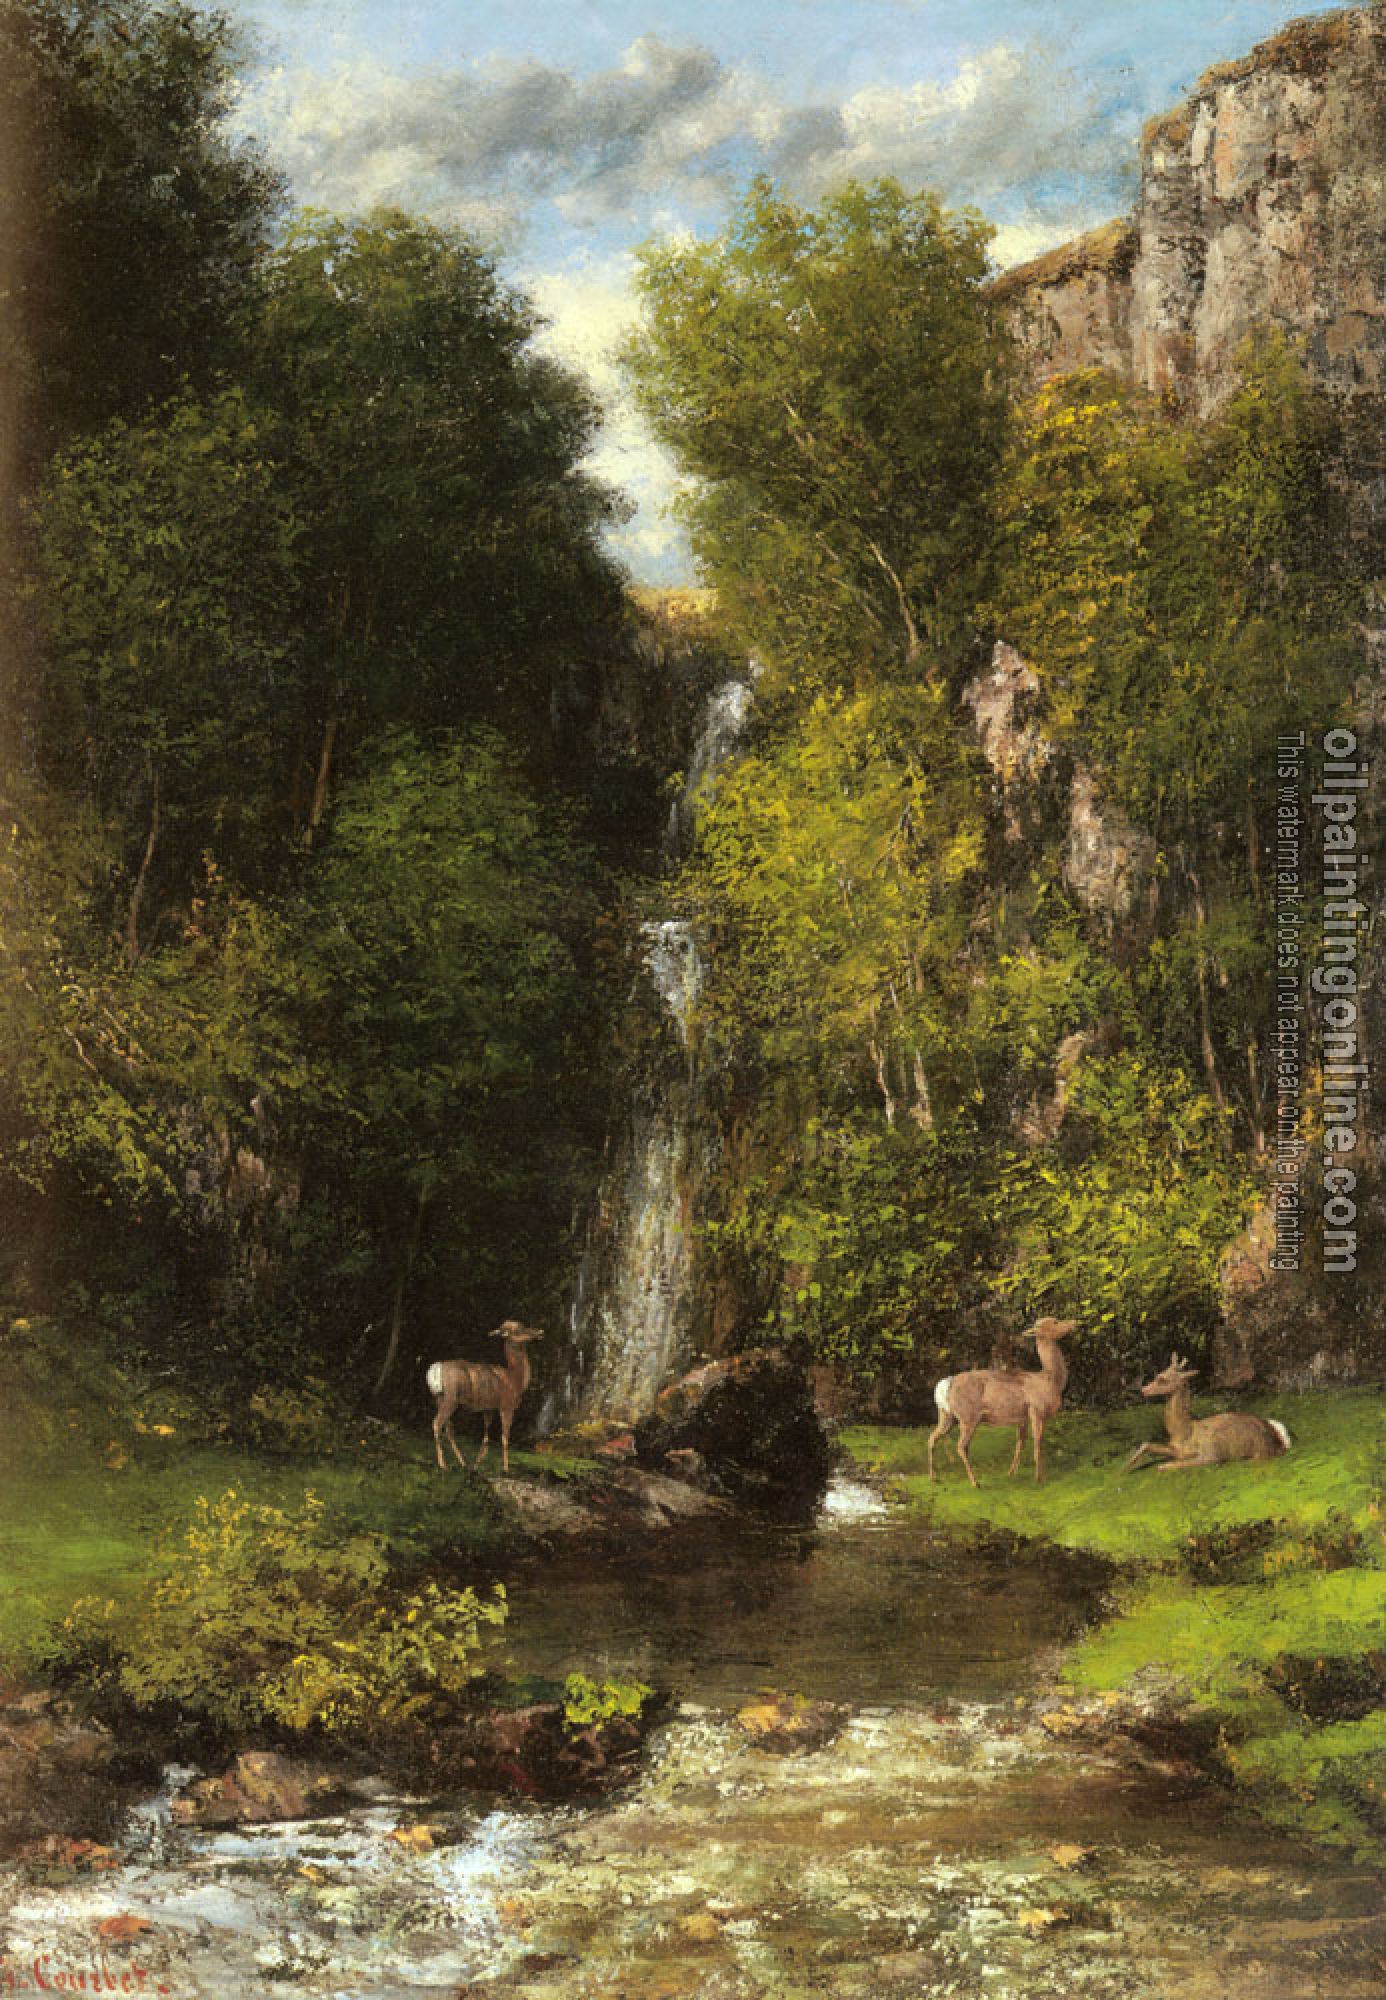 Courbet, Gustave - A Family of Deer in a Landscape with a Waterfall